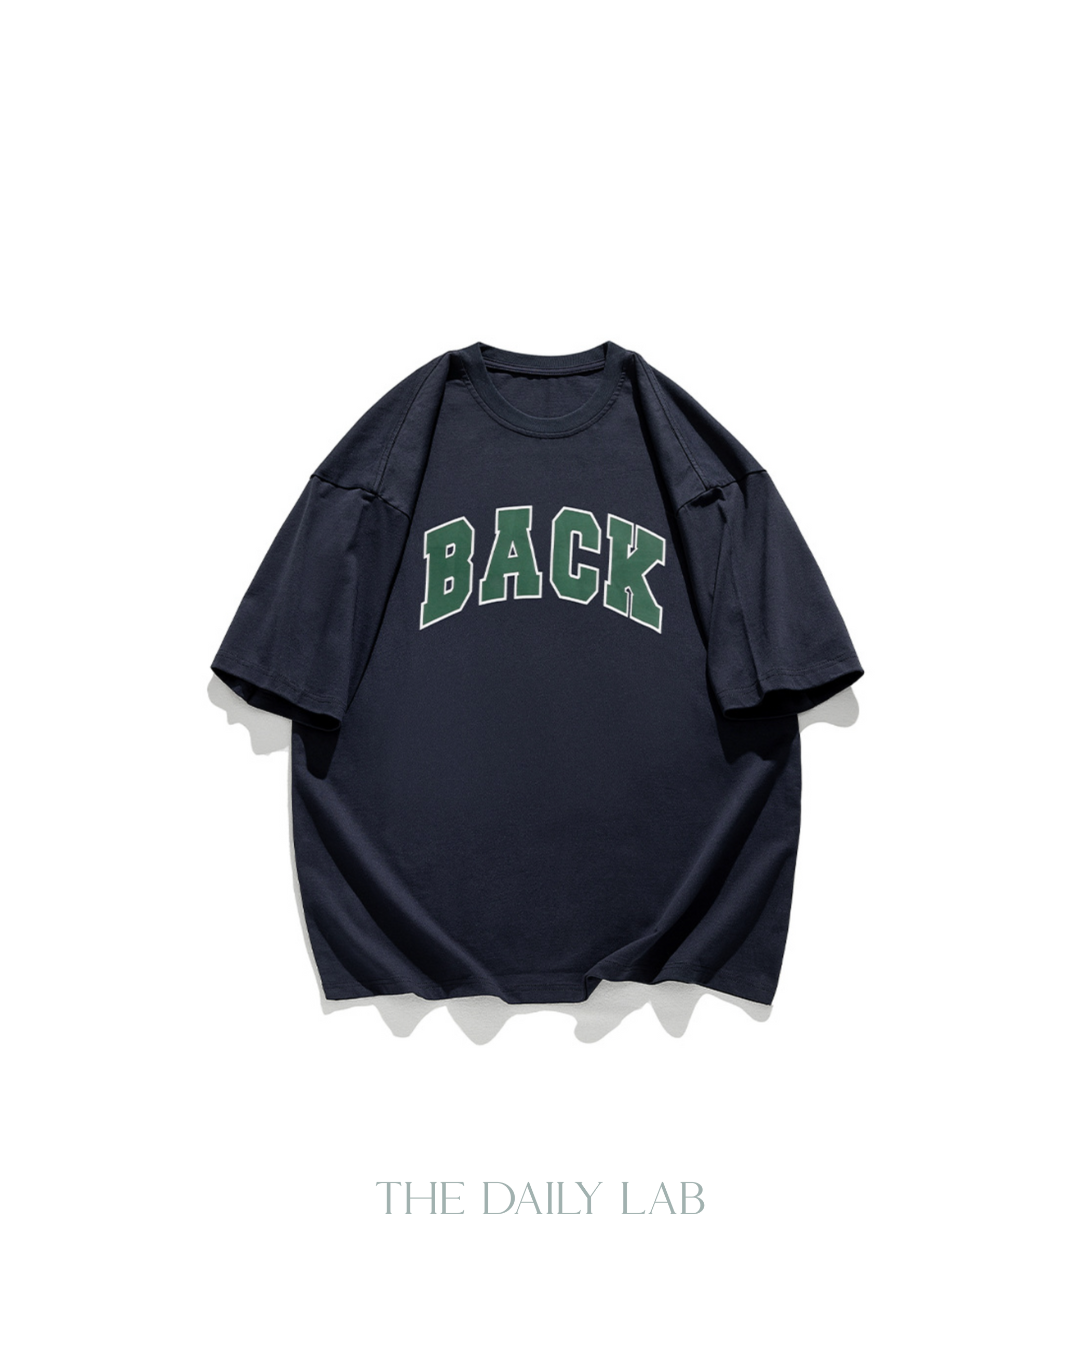 BACK Cotton Tee in Navy